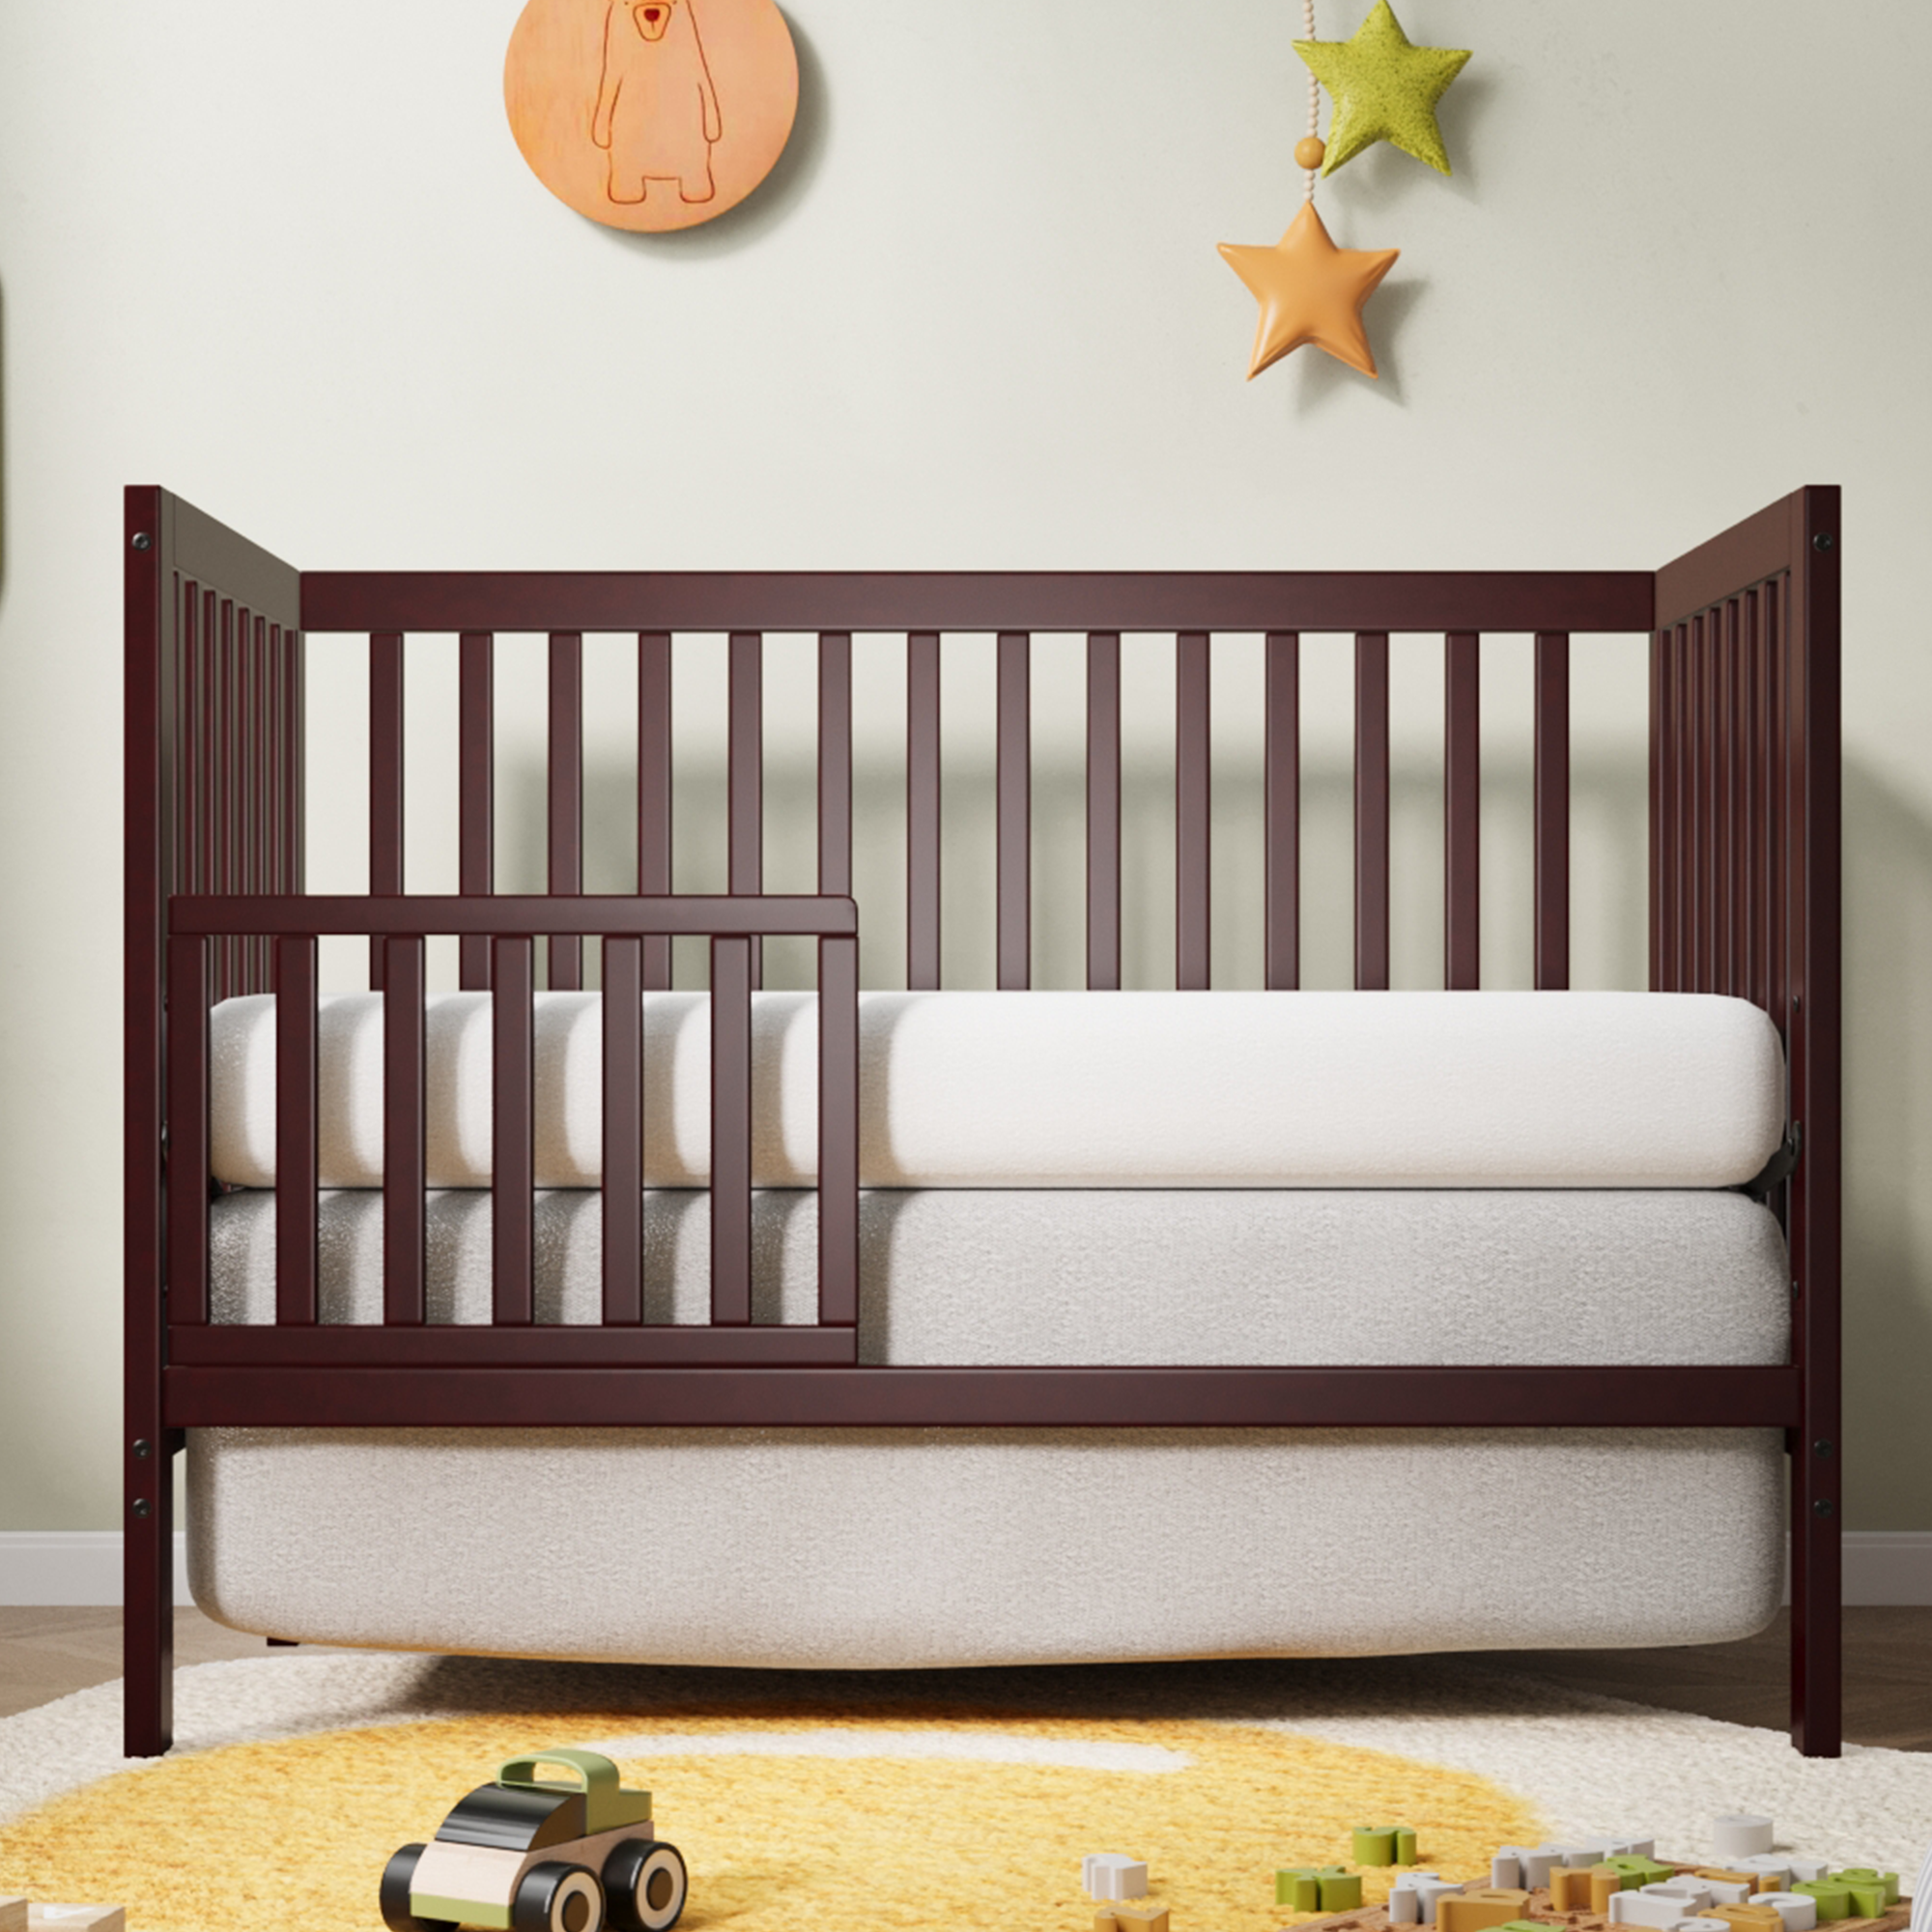 Sesslife 5-In-1 Convertible Crib, Baby Bed, Converts from Baby Crib to Toddler Bed, Fits Standard Full-Size Crib Mattress ,Easy to Assemble(Espresso) - image 2 of 11